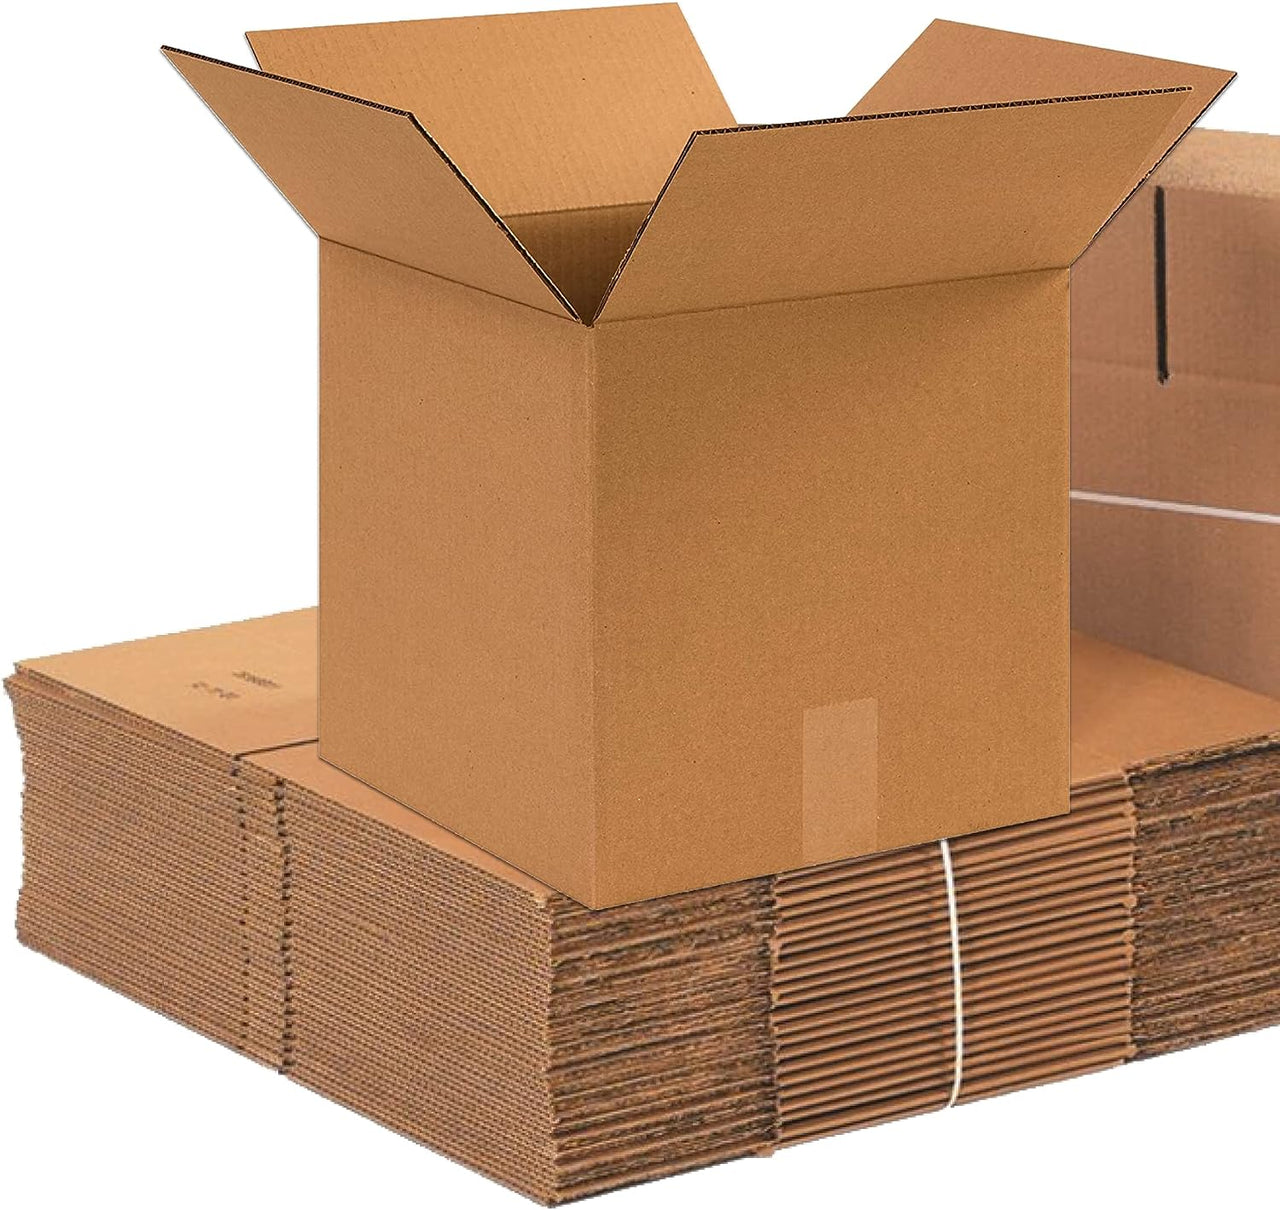 Shipping Boxes 14"L x 14"W x 14"H 25-Pack Corrugated Cardboard Box for Packing Moving Storage